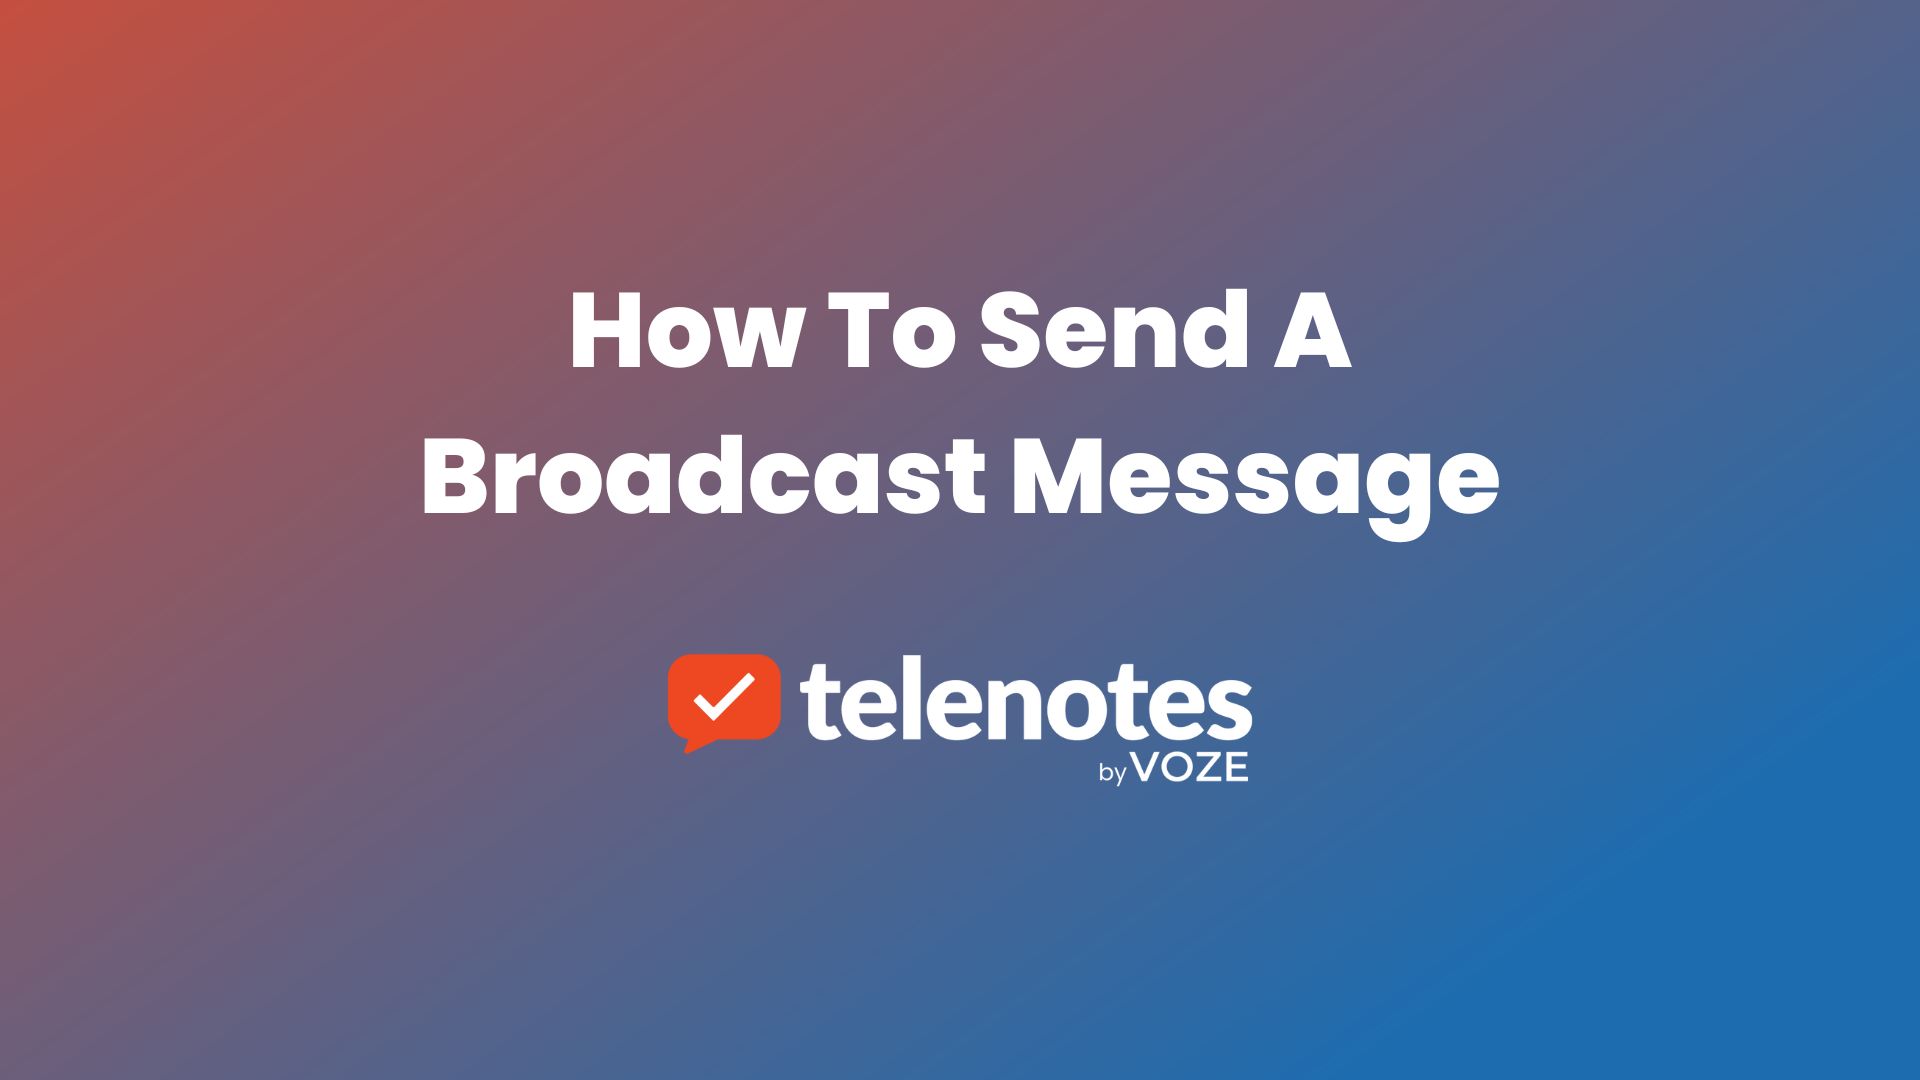 How To Send A Broadcast Message Within The Telenotes App